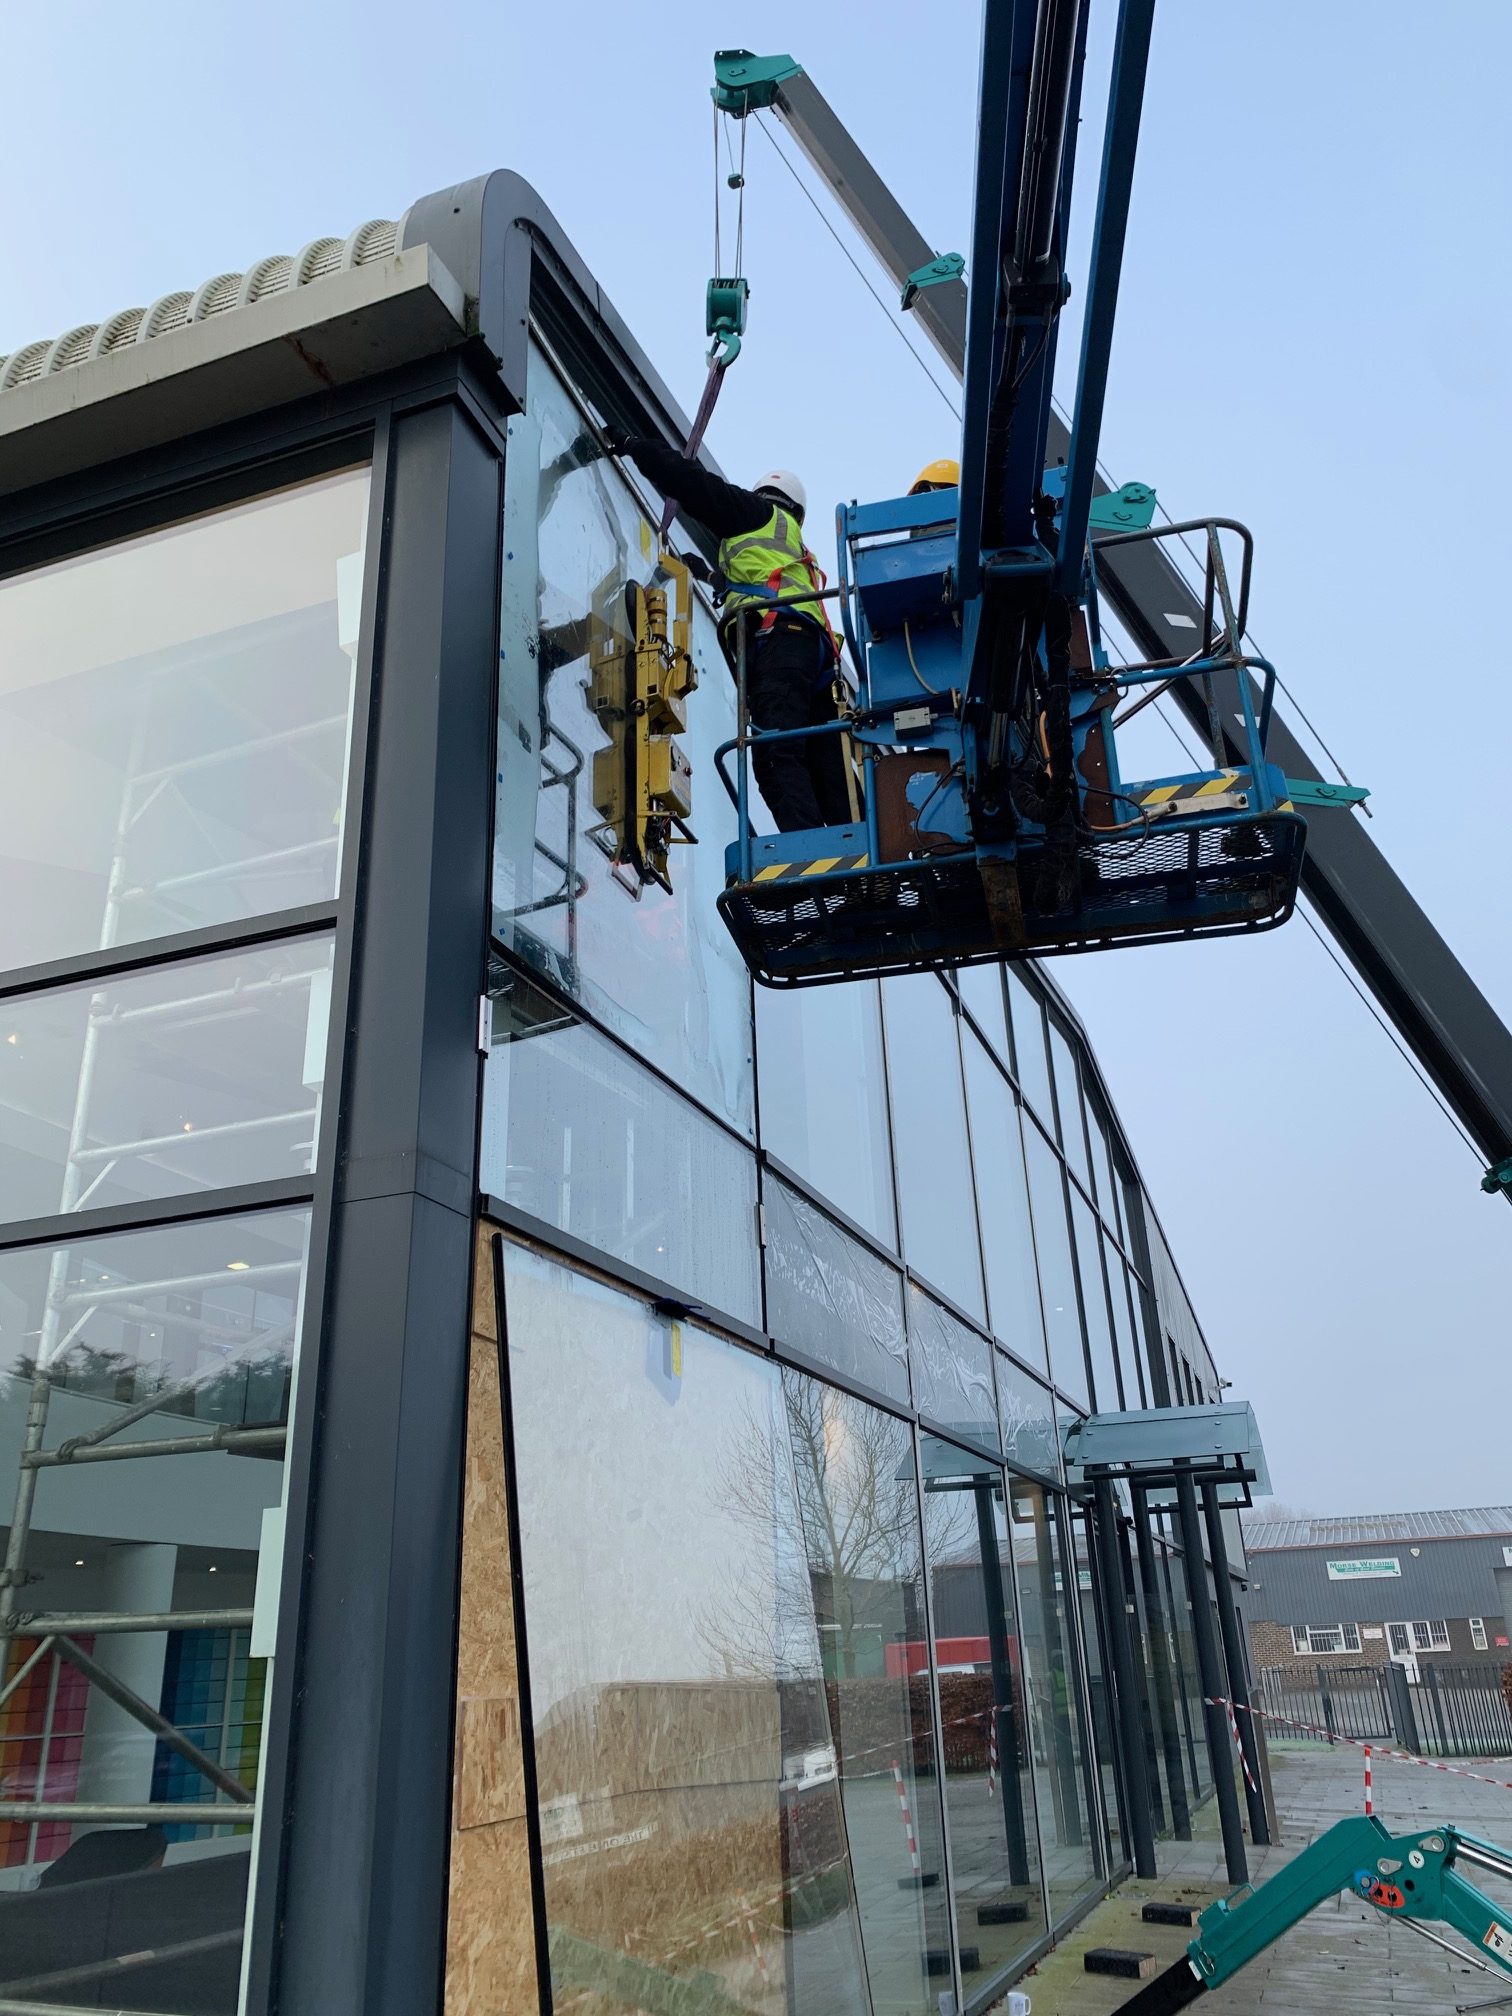 Maneuvering the glass into place